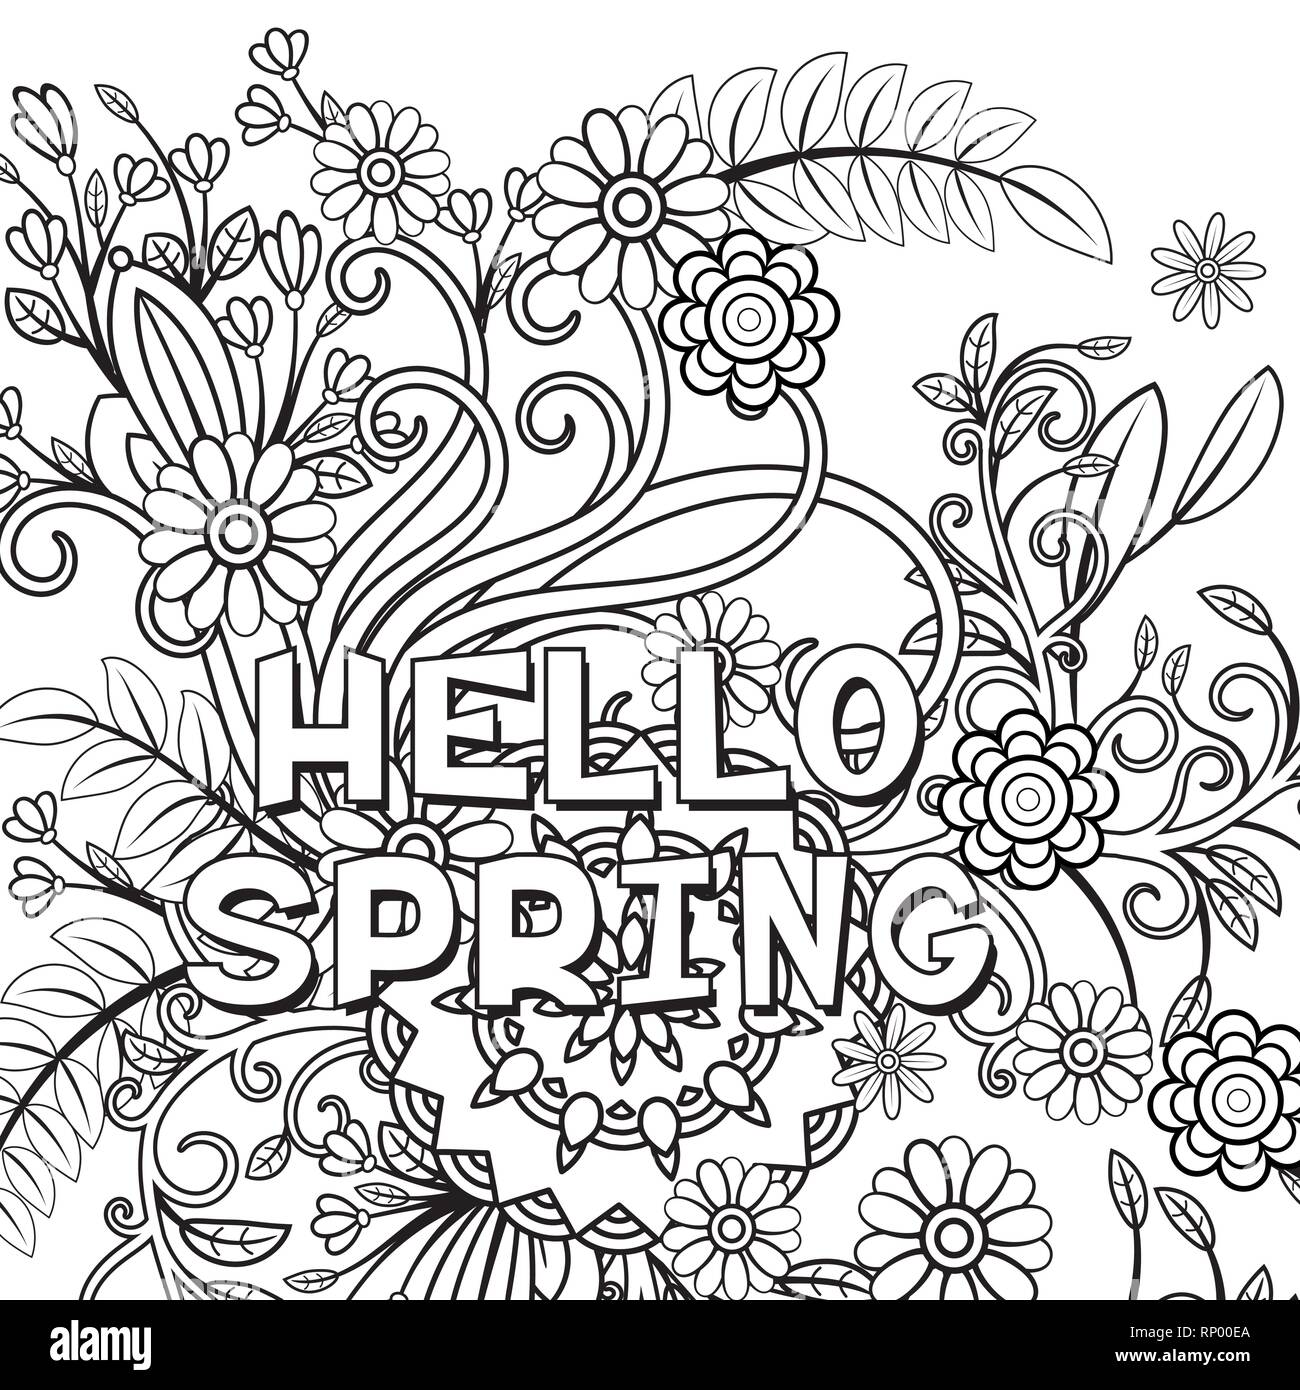 Hello spring coloring page with beautiful flowers. Black and white ...